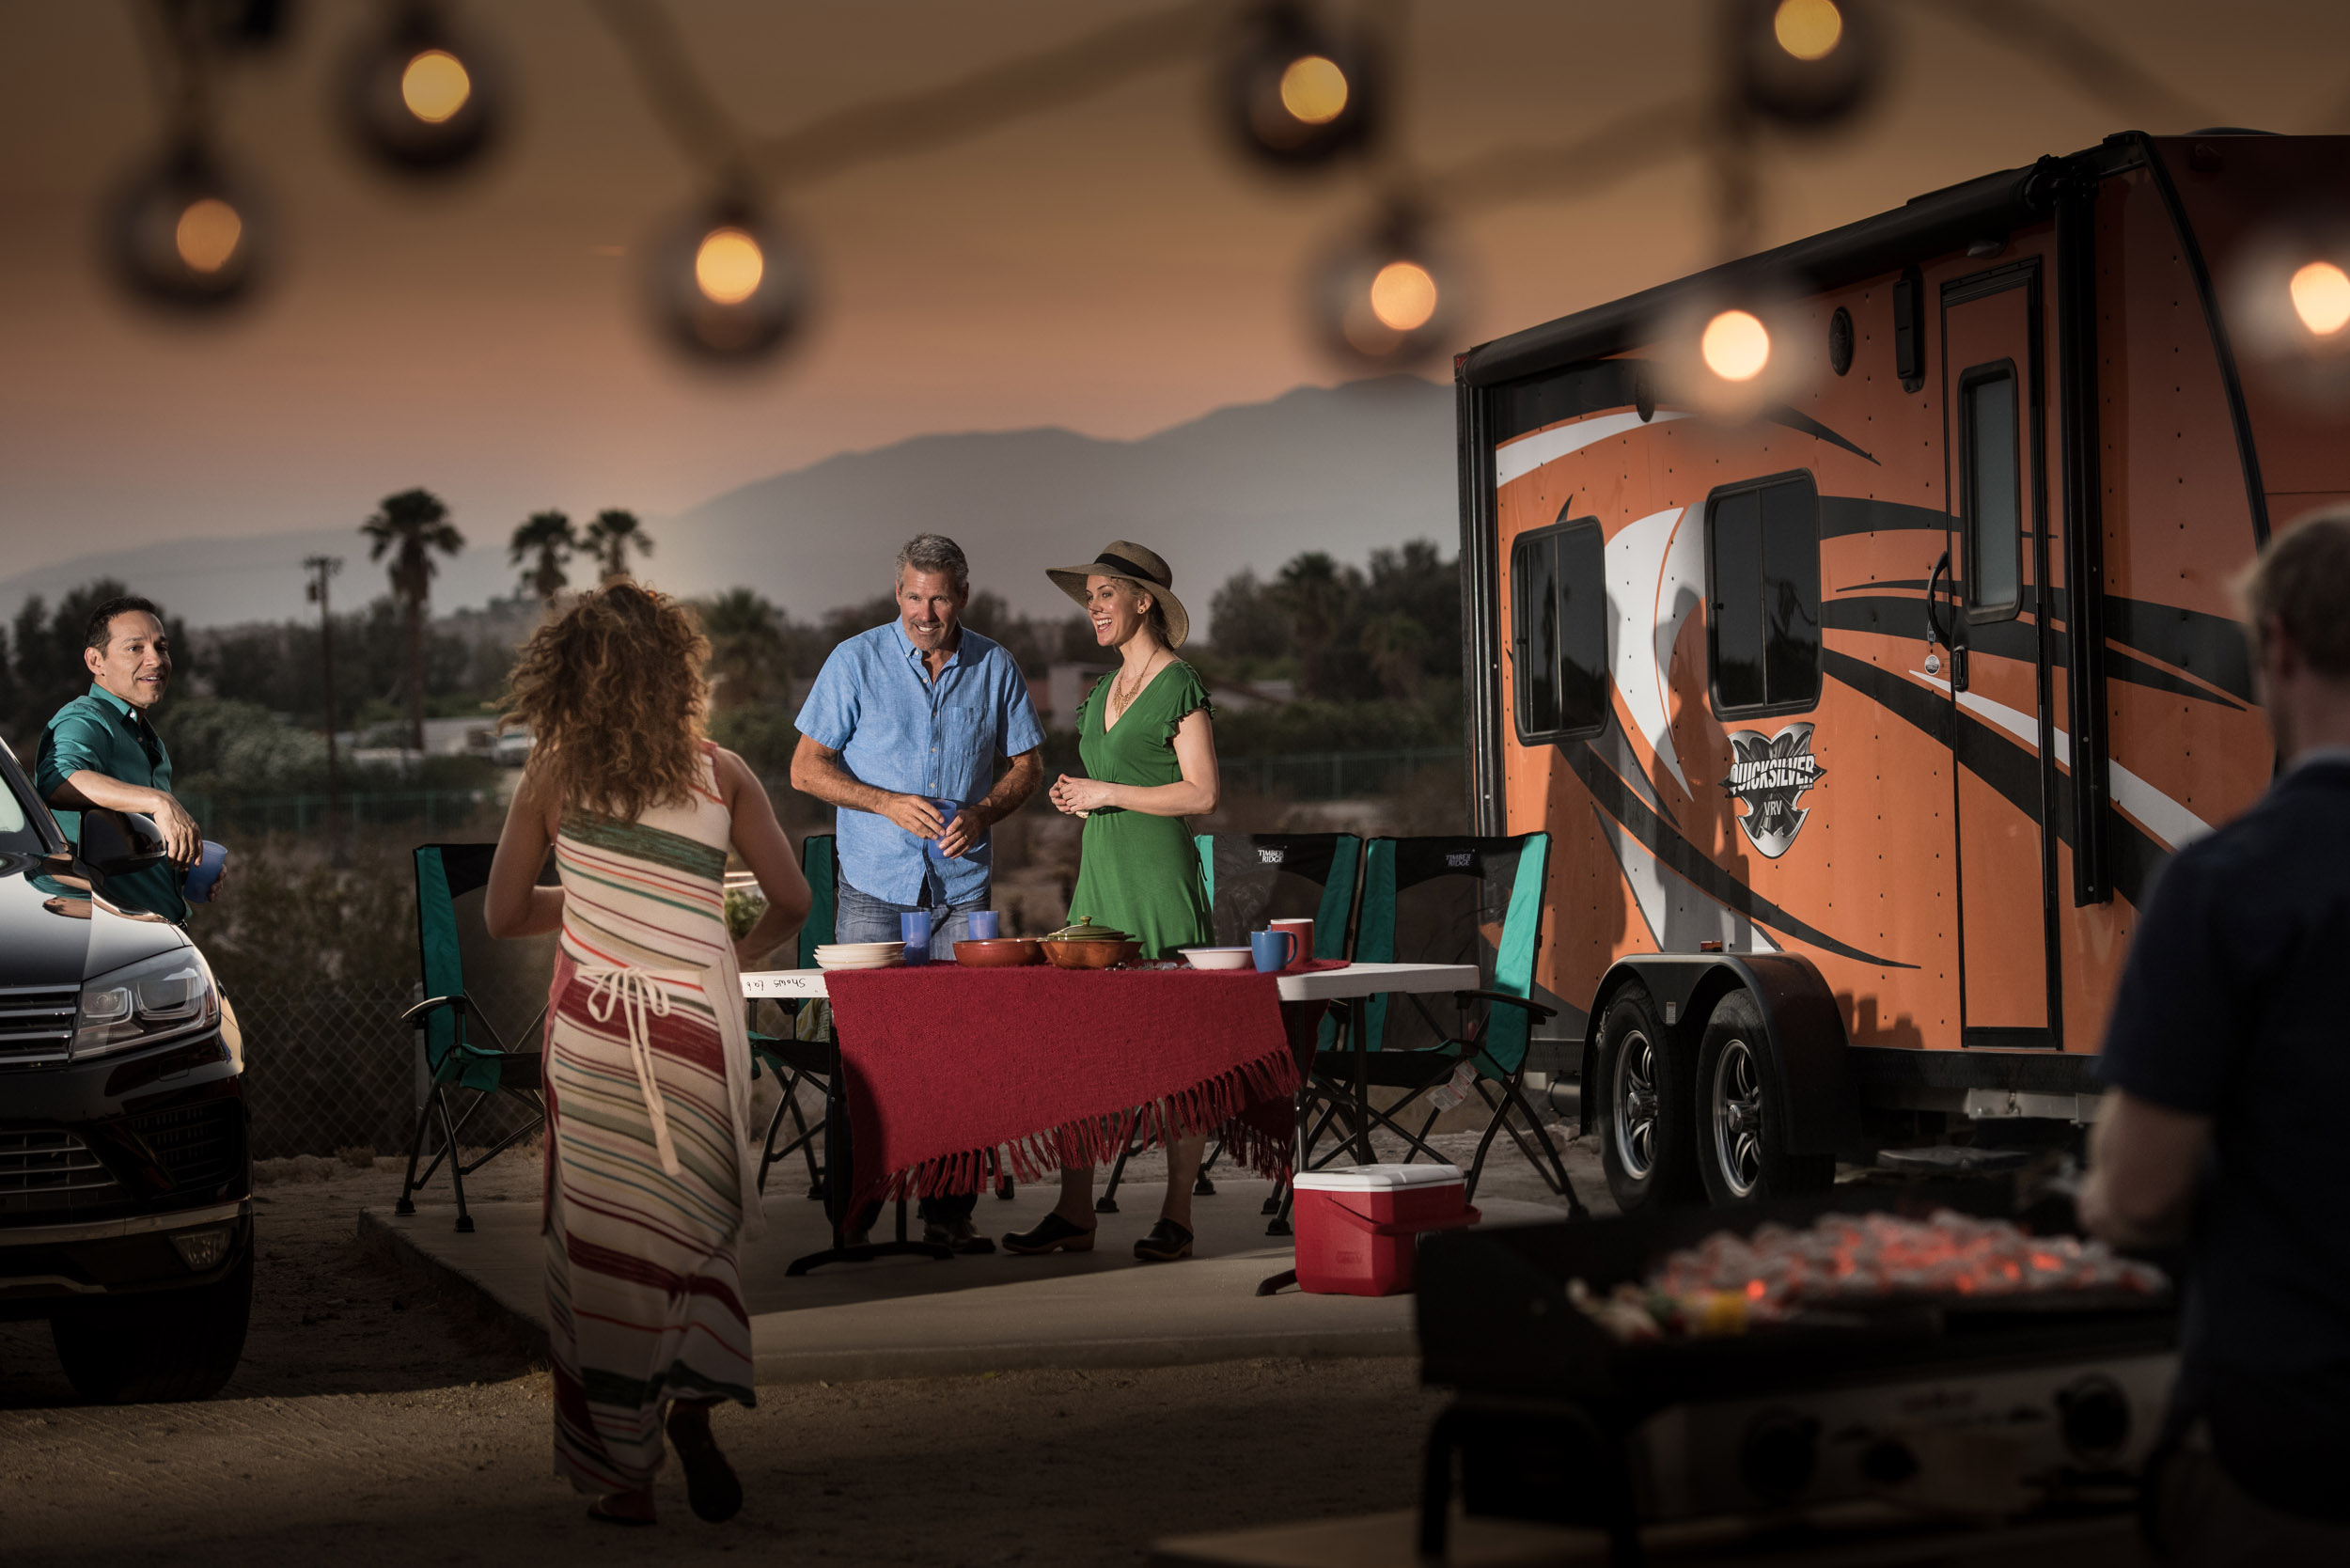 Family Fun at Resorts in Greater Palm Springs